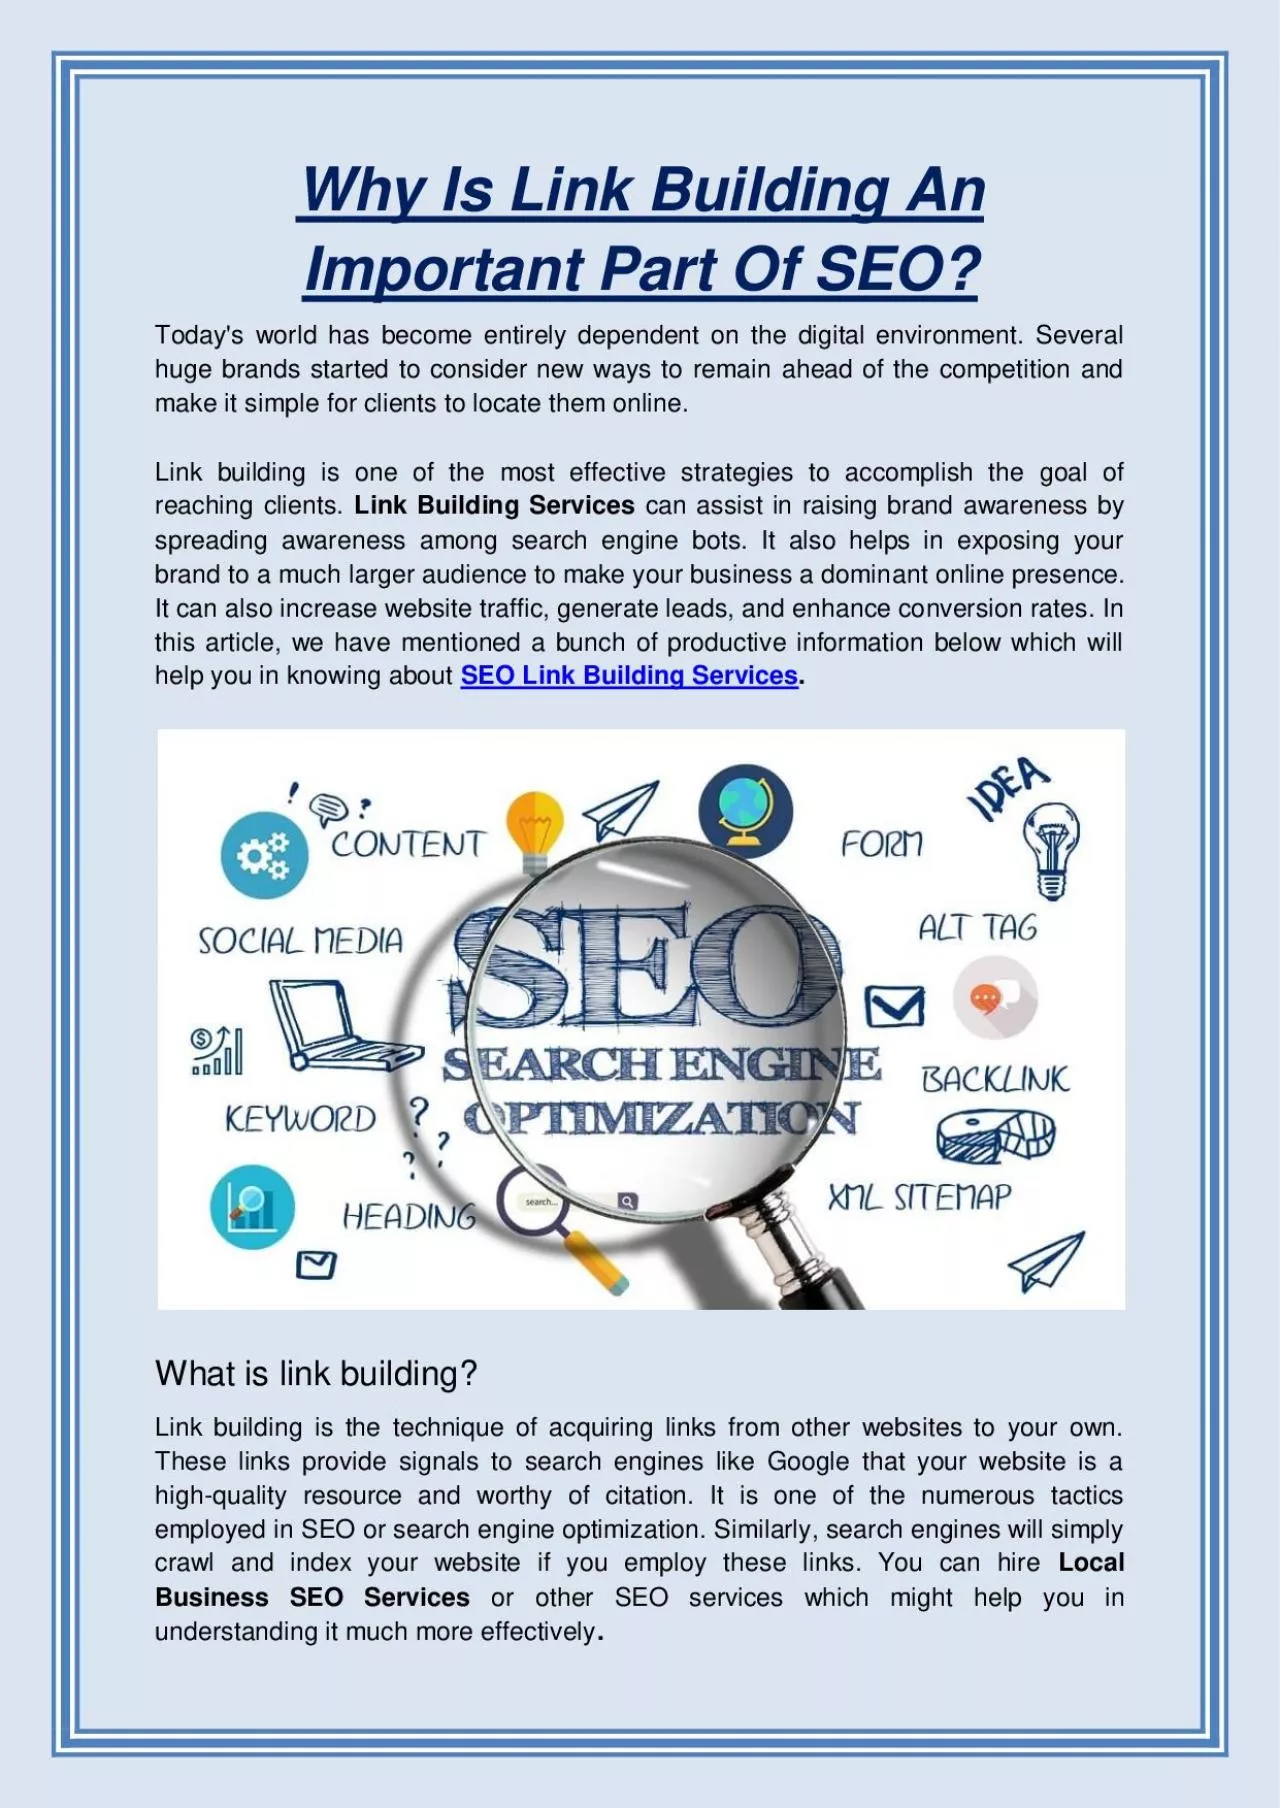 Why Is Link Building An Important Part Of SEO?